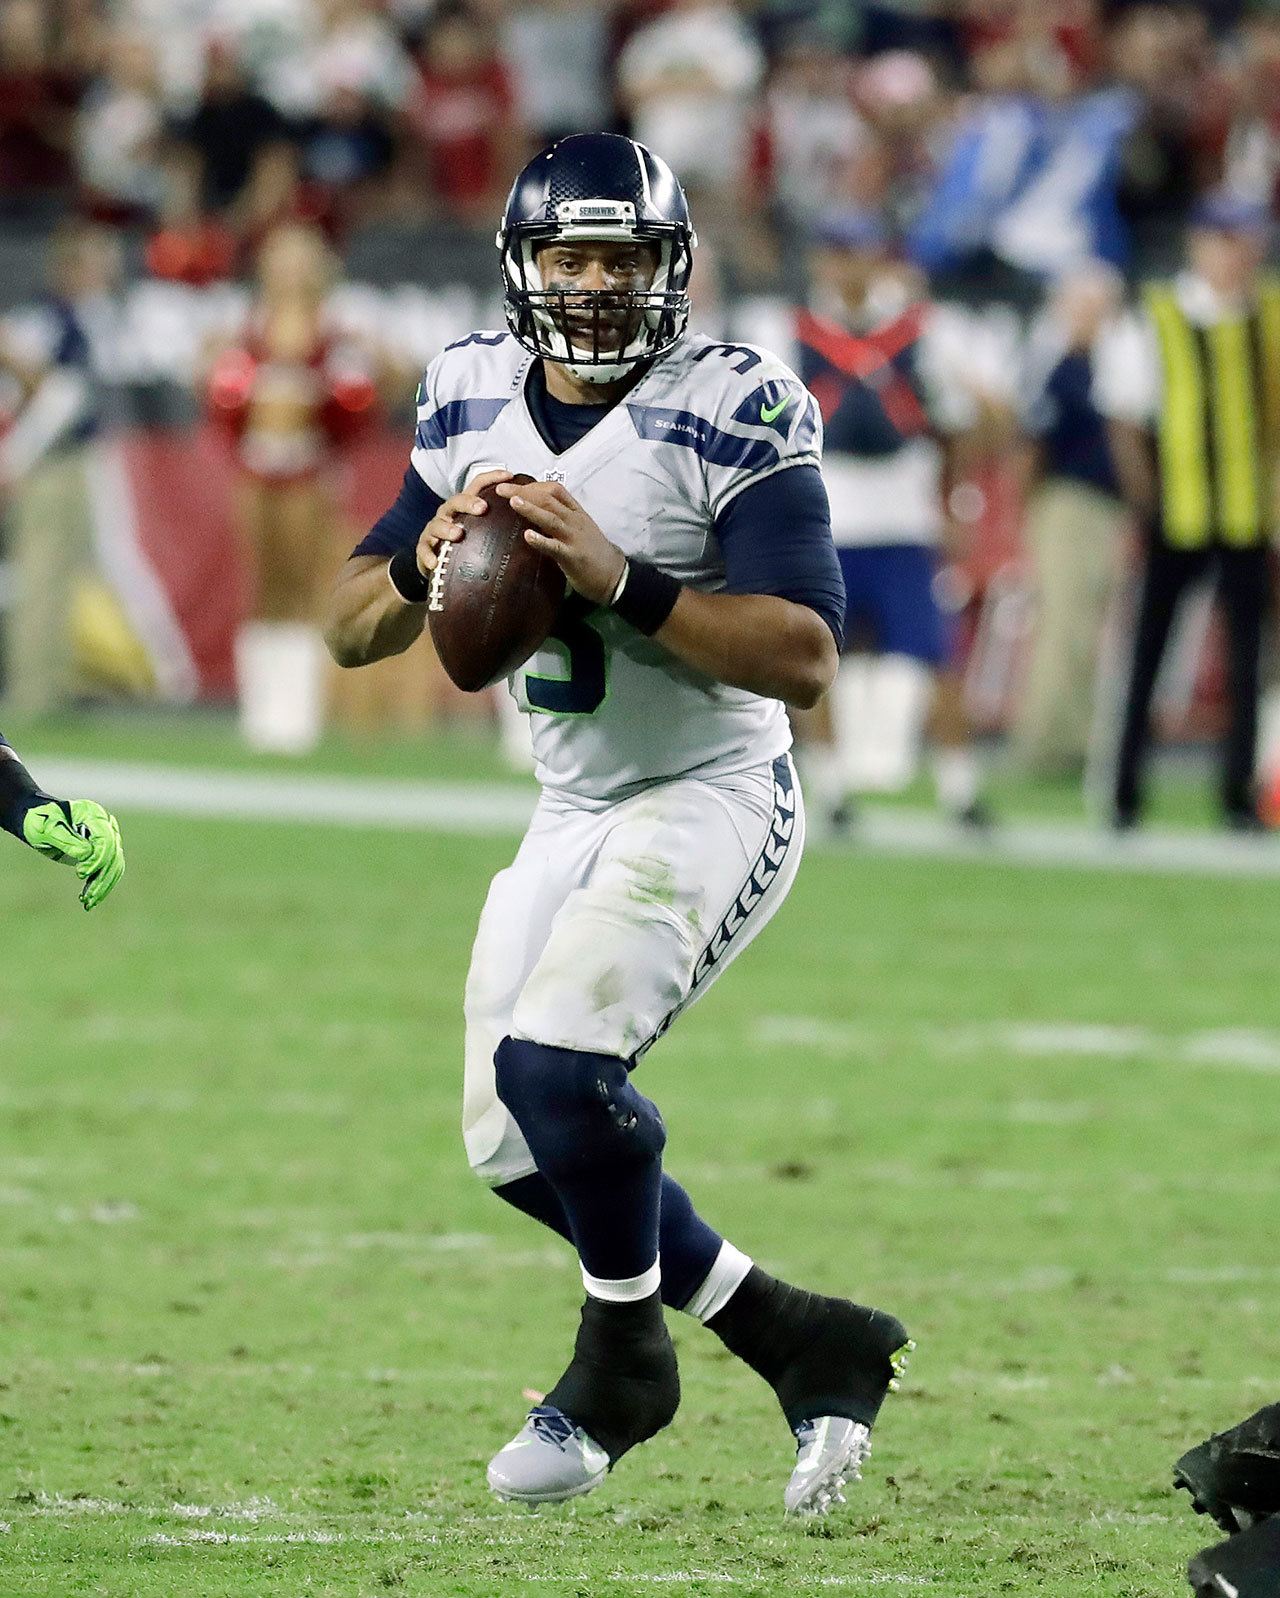 Seattle quarterback Russell Wilson (3) drops back to pass in the first half of the Seahawks’ 6-6 tie with Arizona on Sunday in Glendale, Ariz. It may be time for the Seahawks to give their starter a week off to rest his myriad injuries. (AP Photo/Rick Scuteri)